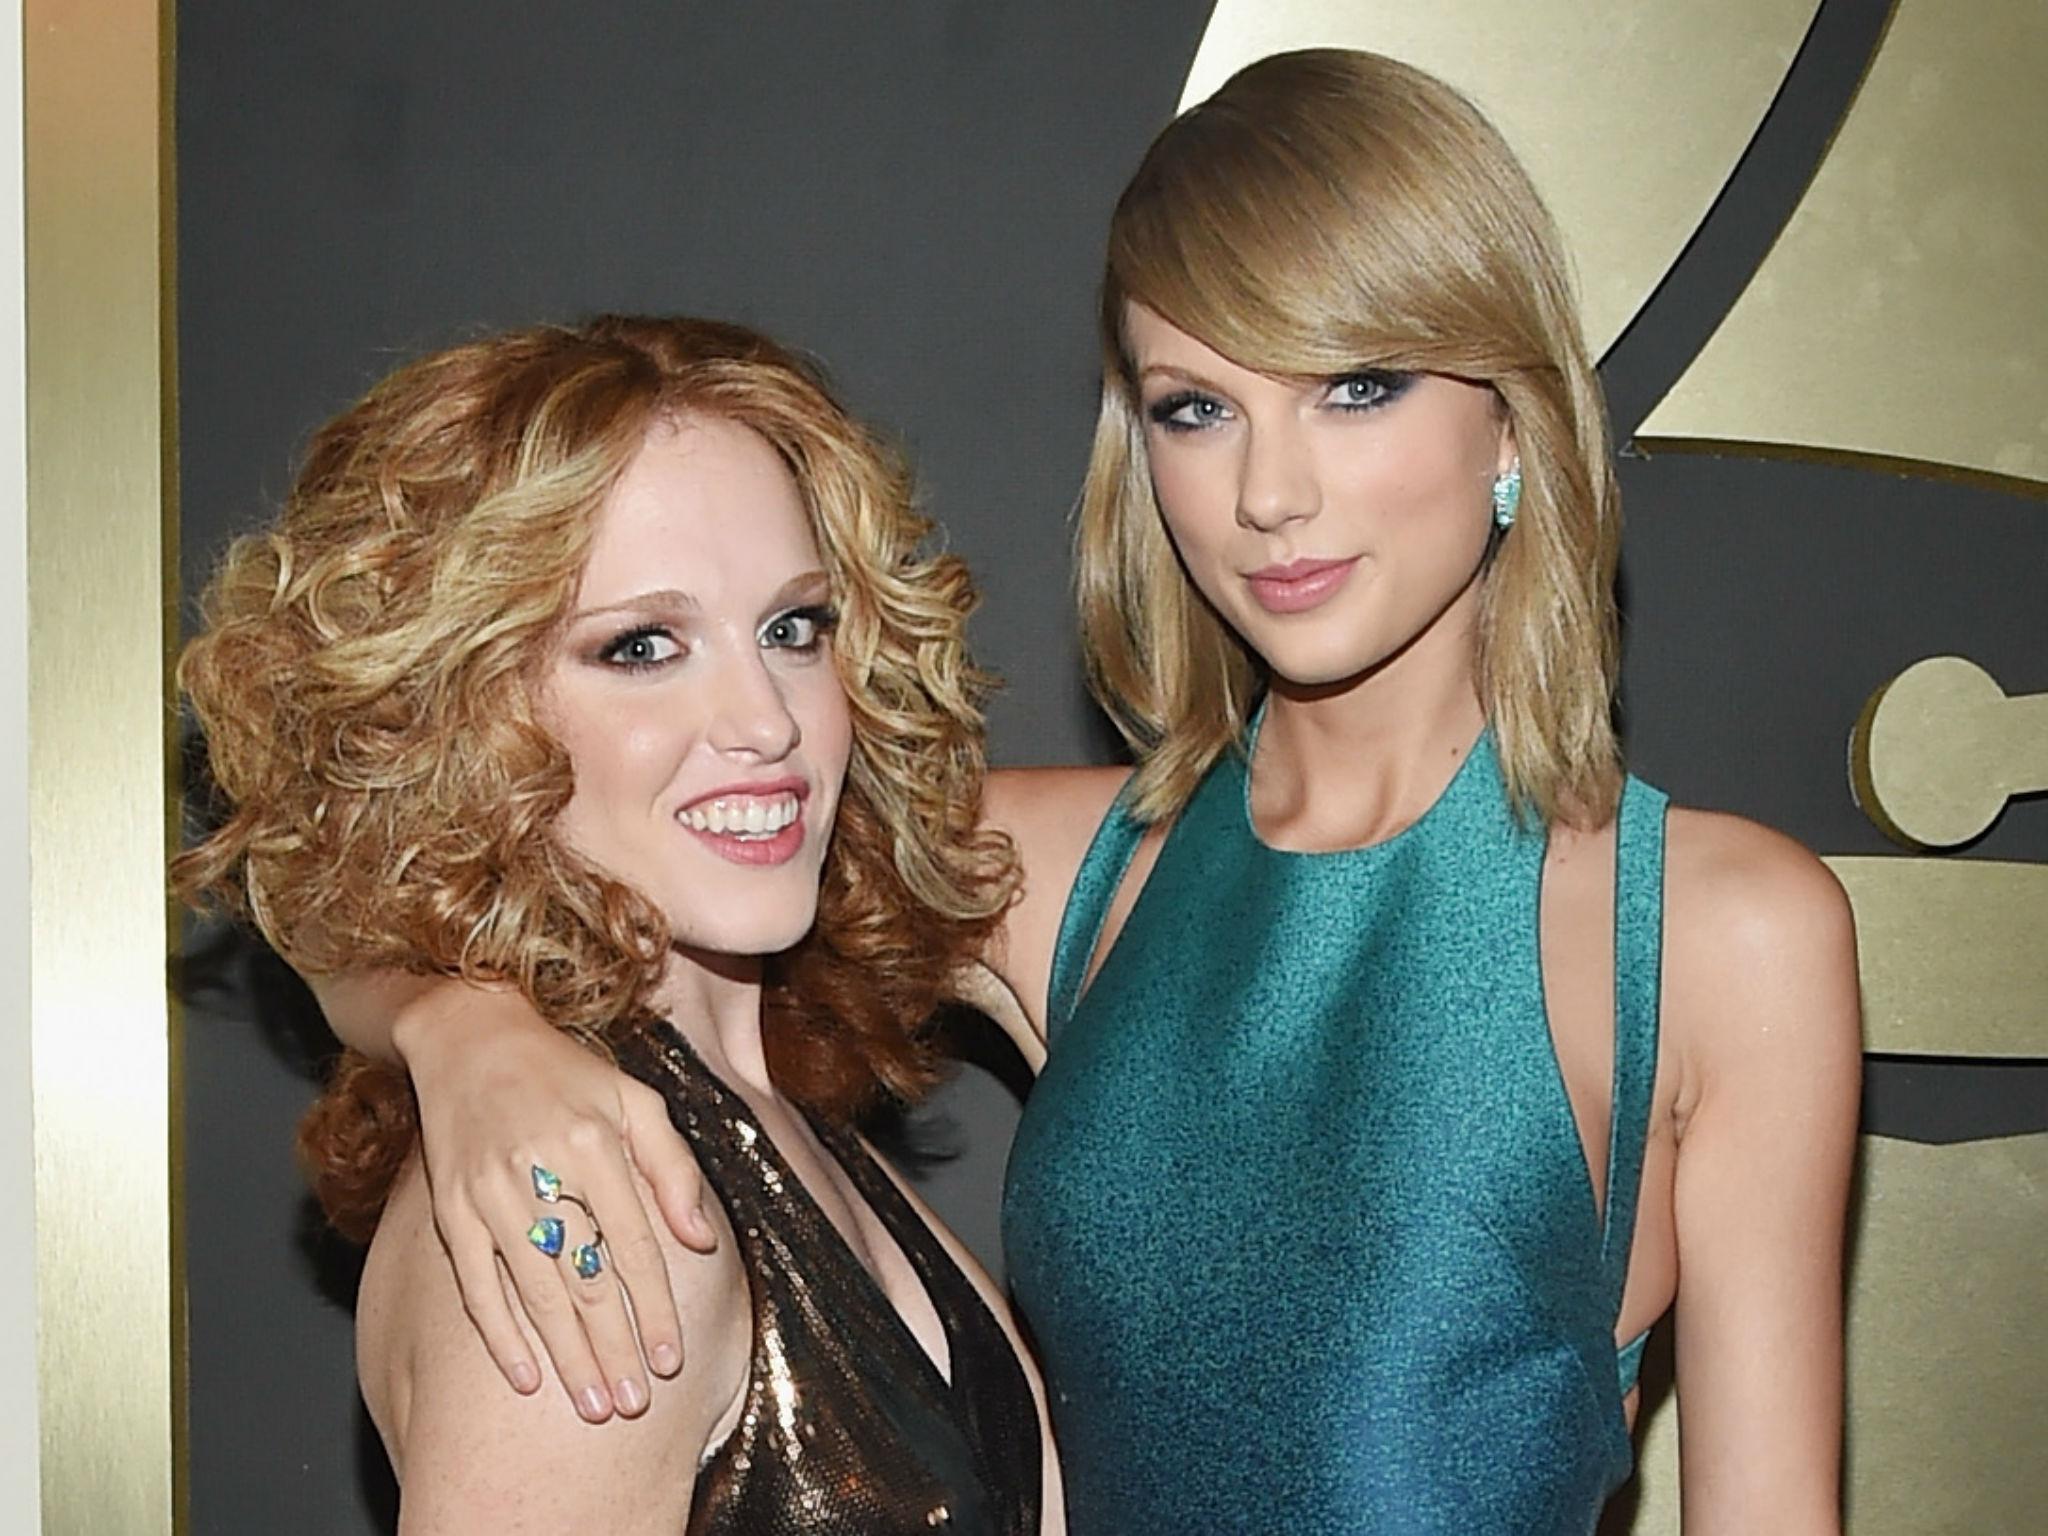 Abigail Anderson and Taylor Swift at the 2015 Grammy awards